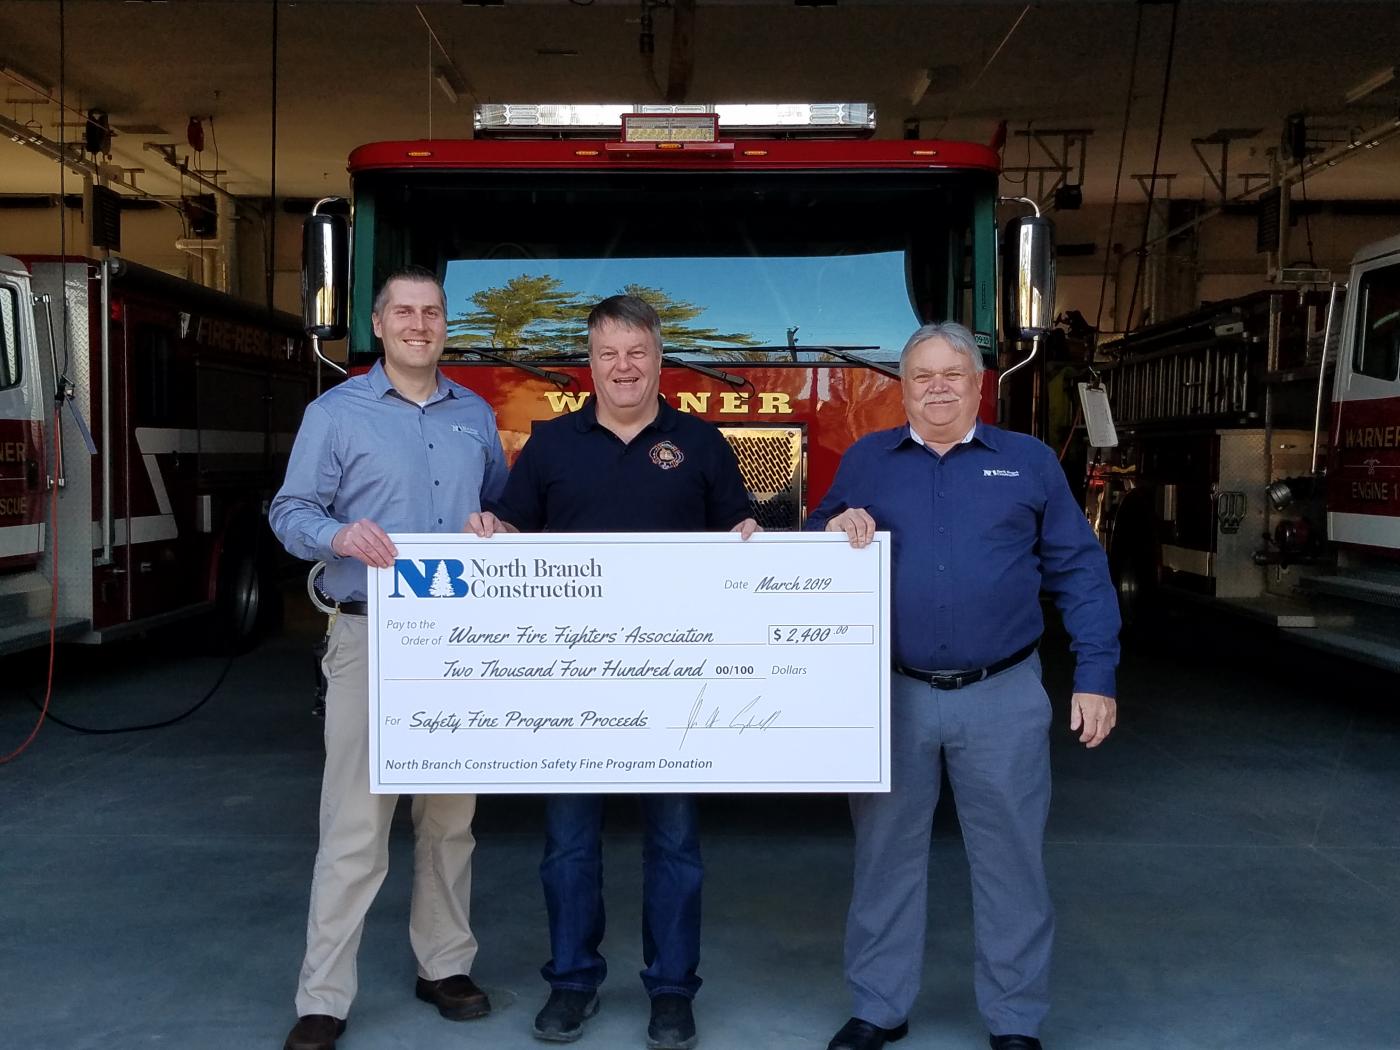 North Branch Construction Presents Safety Fine Program Proceeds at Recently-Completed Warner Fire Station